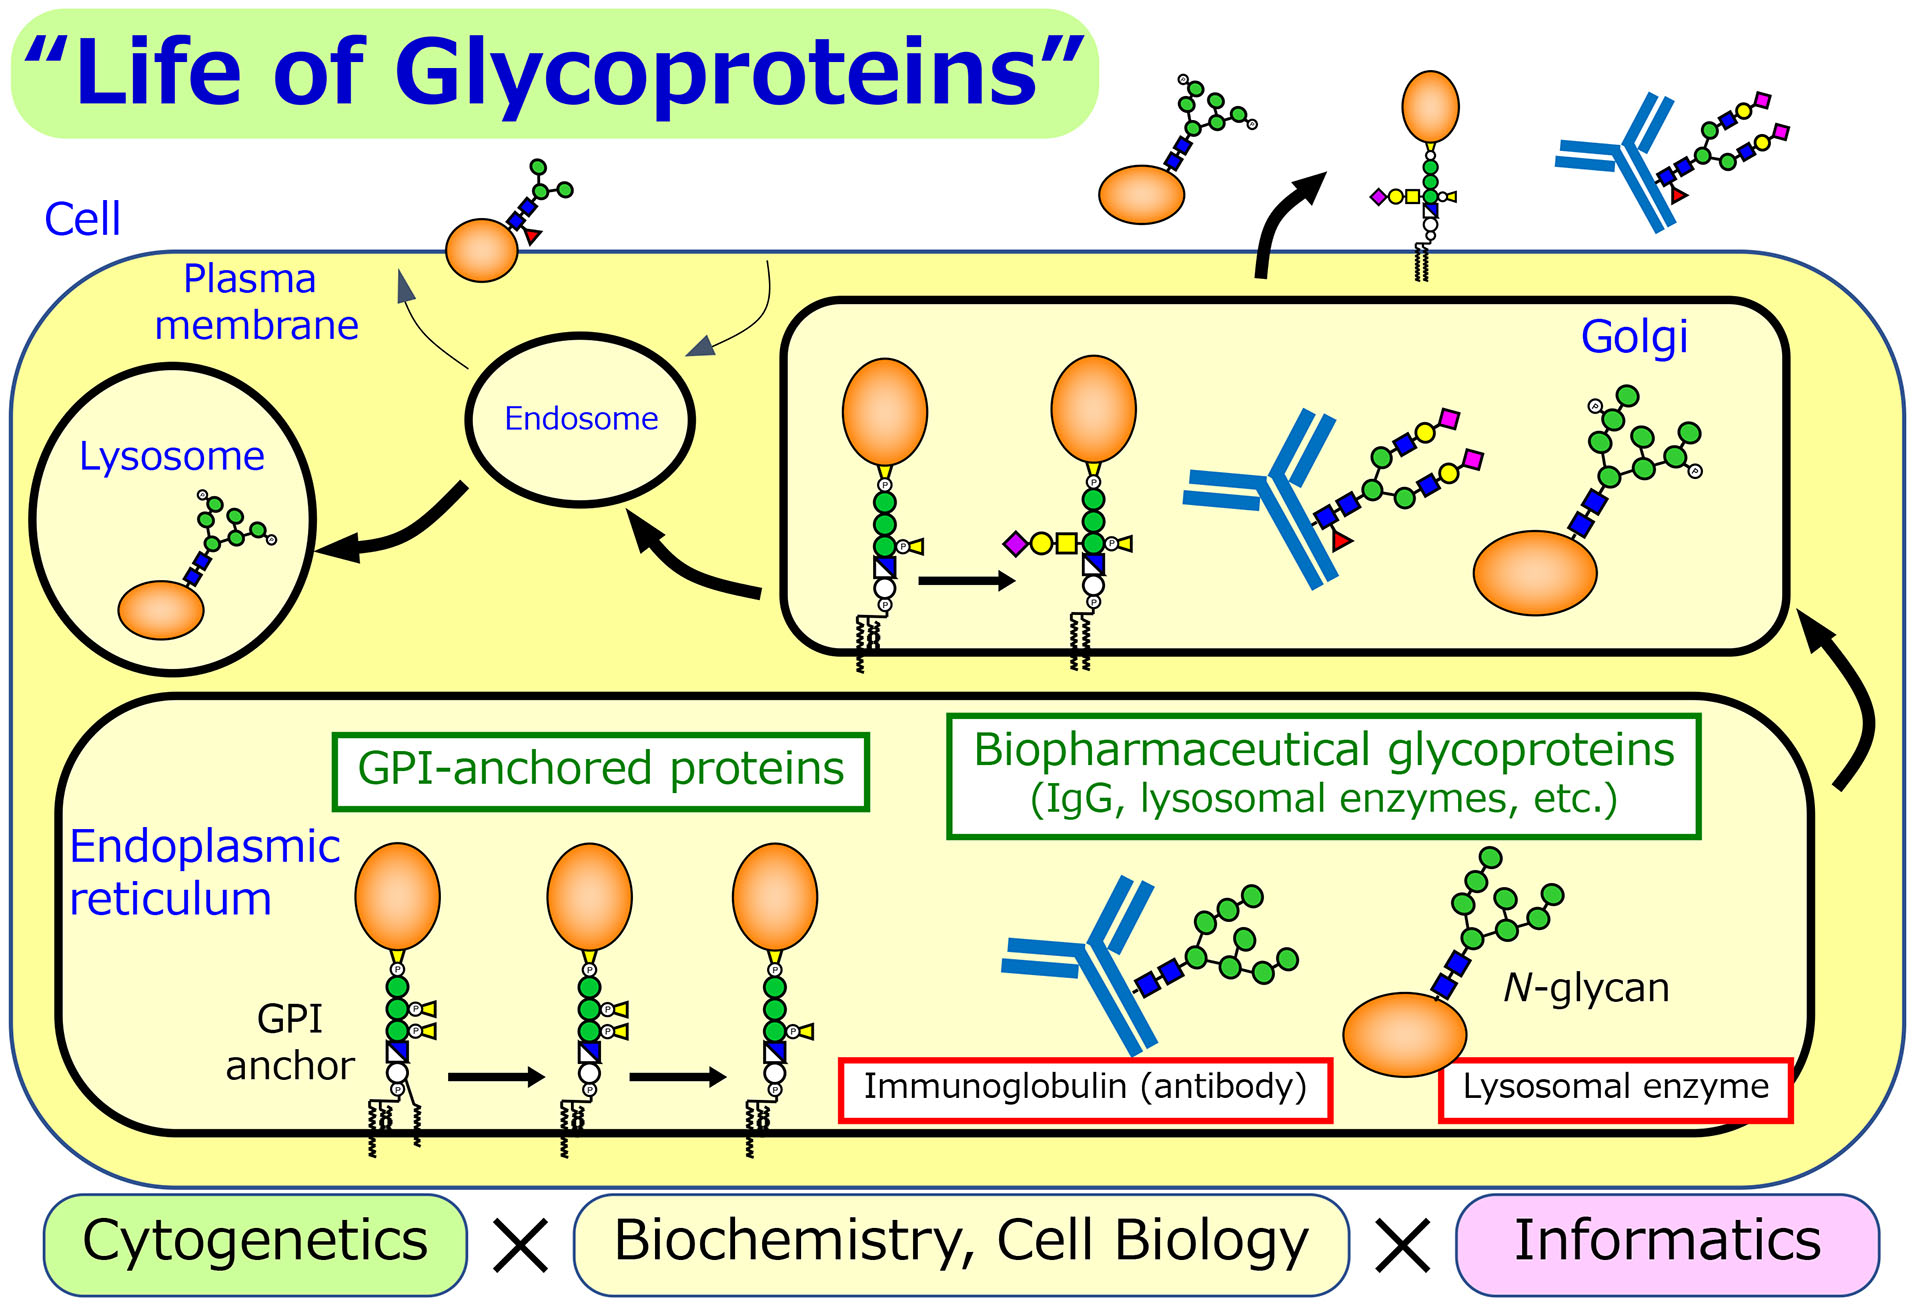 Life of Glycoproteins